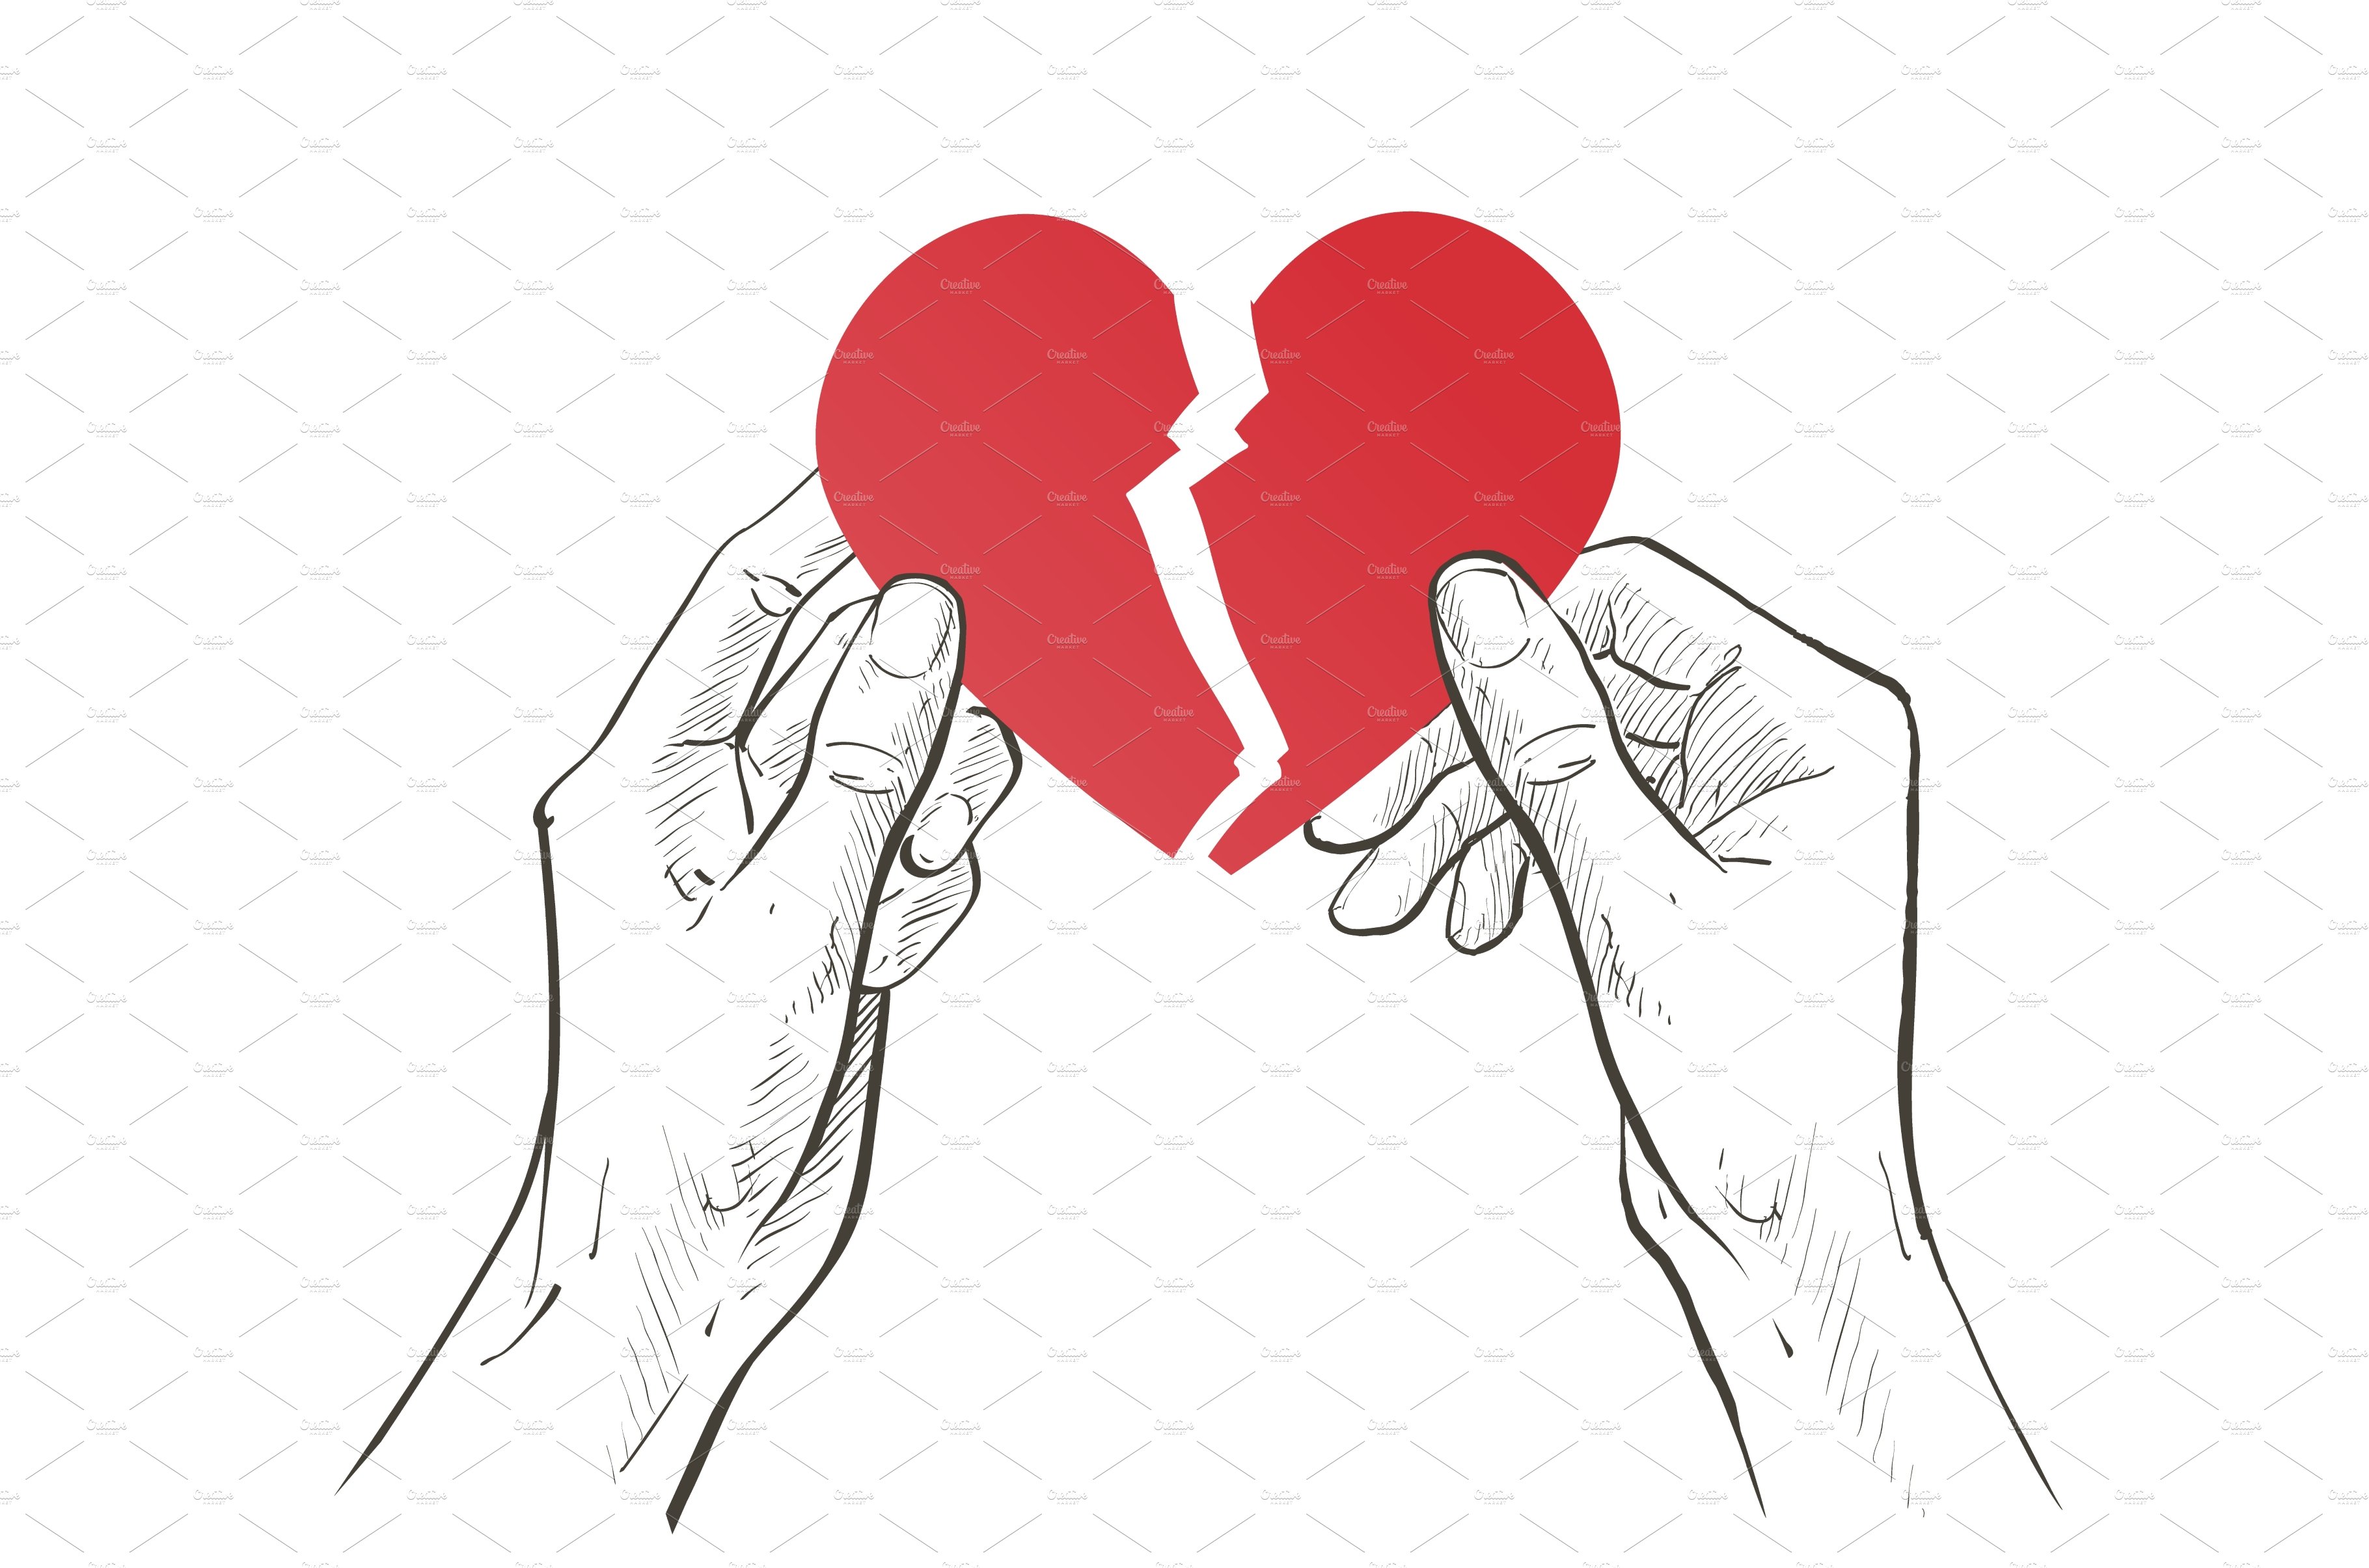 Two hands holding heart. Health care cover image.